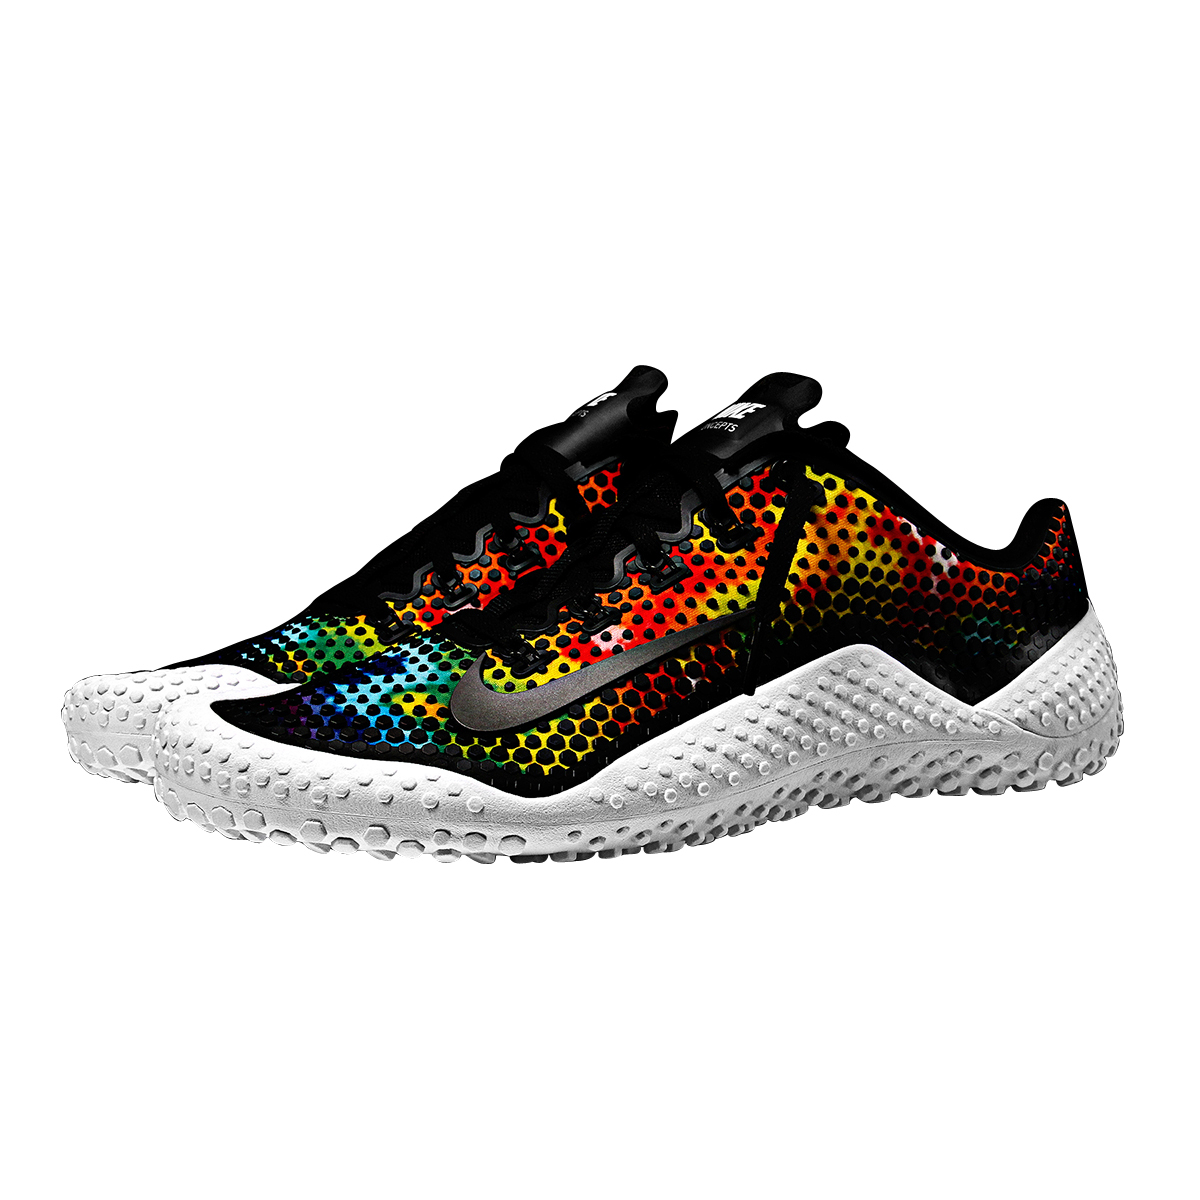 Concepts x Nike Free Trainer 1.0 NFREETR1040